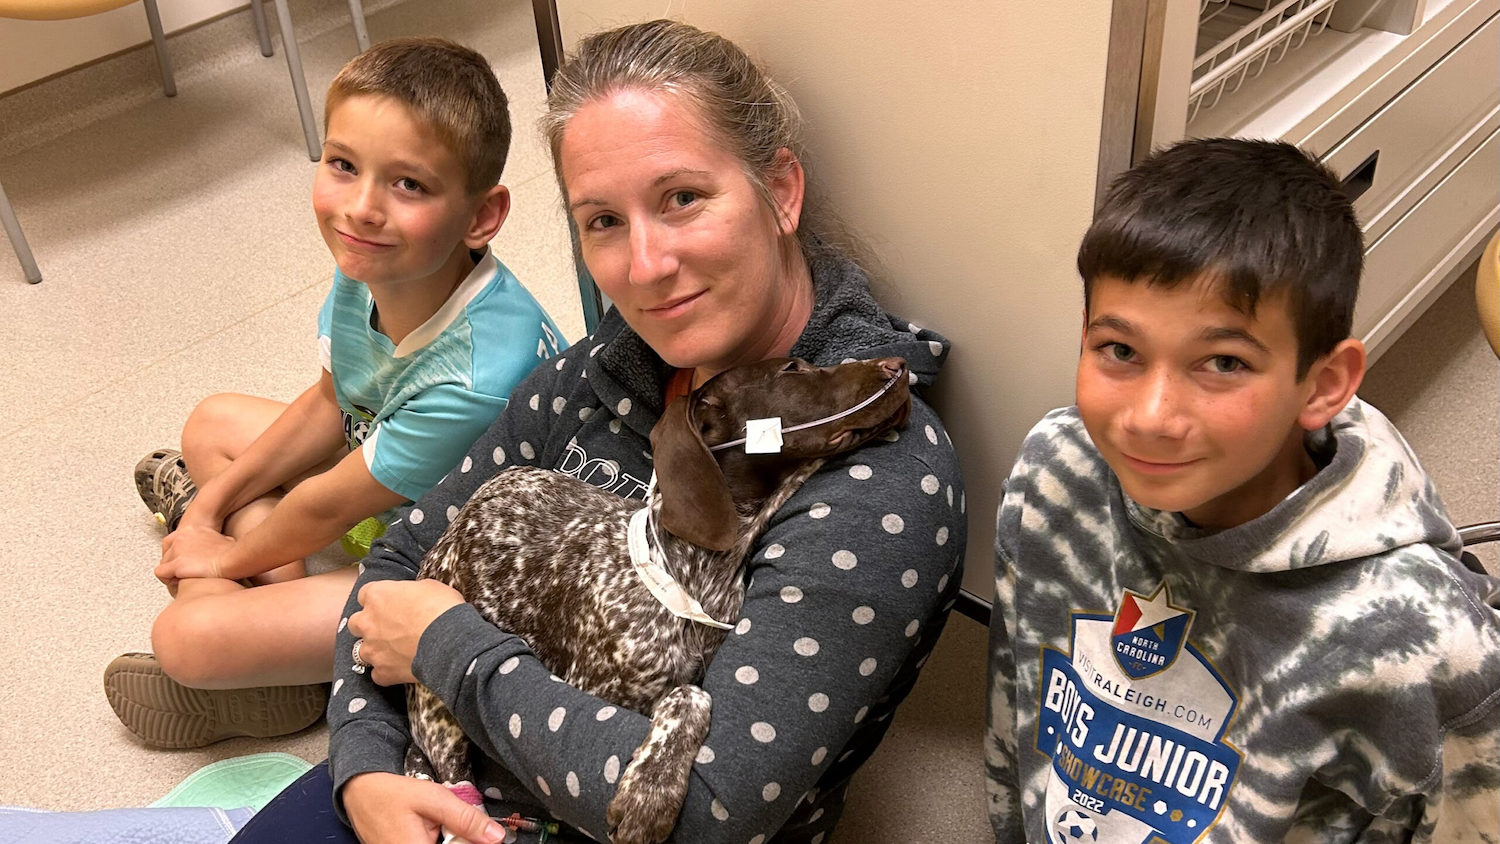 Chelsea Tovar and her sons visit their German shorthaired pointer puppy, Hollen, at NC State Veterinary Hospital in May. Hollen had a nasogastric feeding tube giving her sodium supplements. (photo courtesy of the Tovar family)